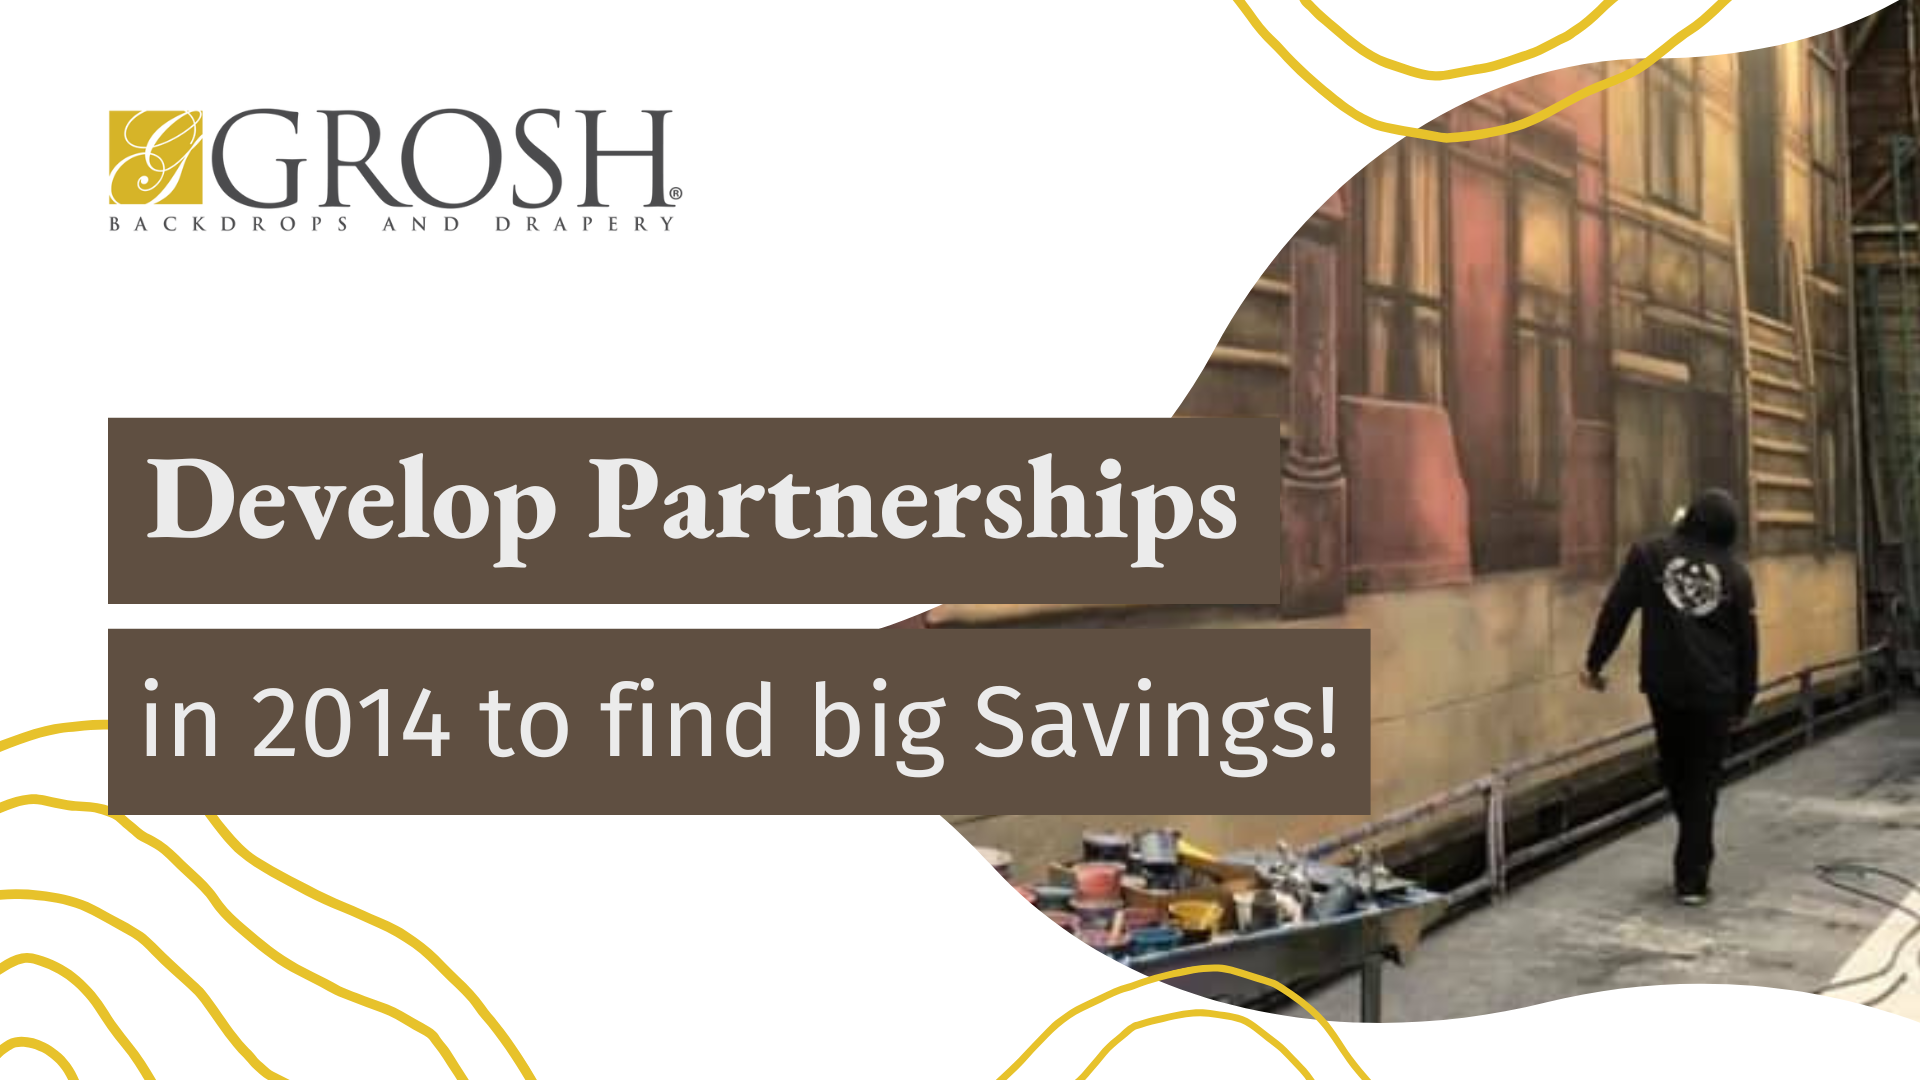 Develop Partnerships in 2014 to find big Savings